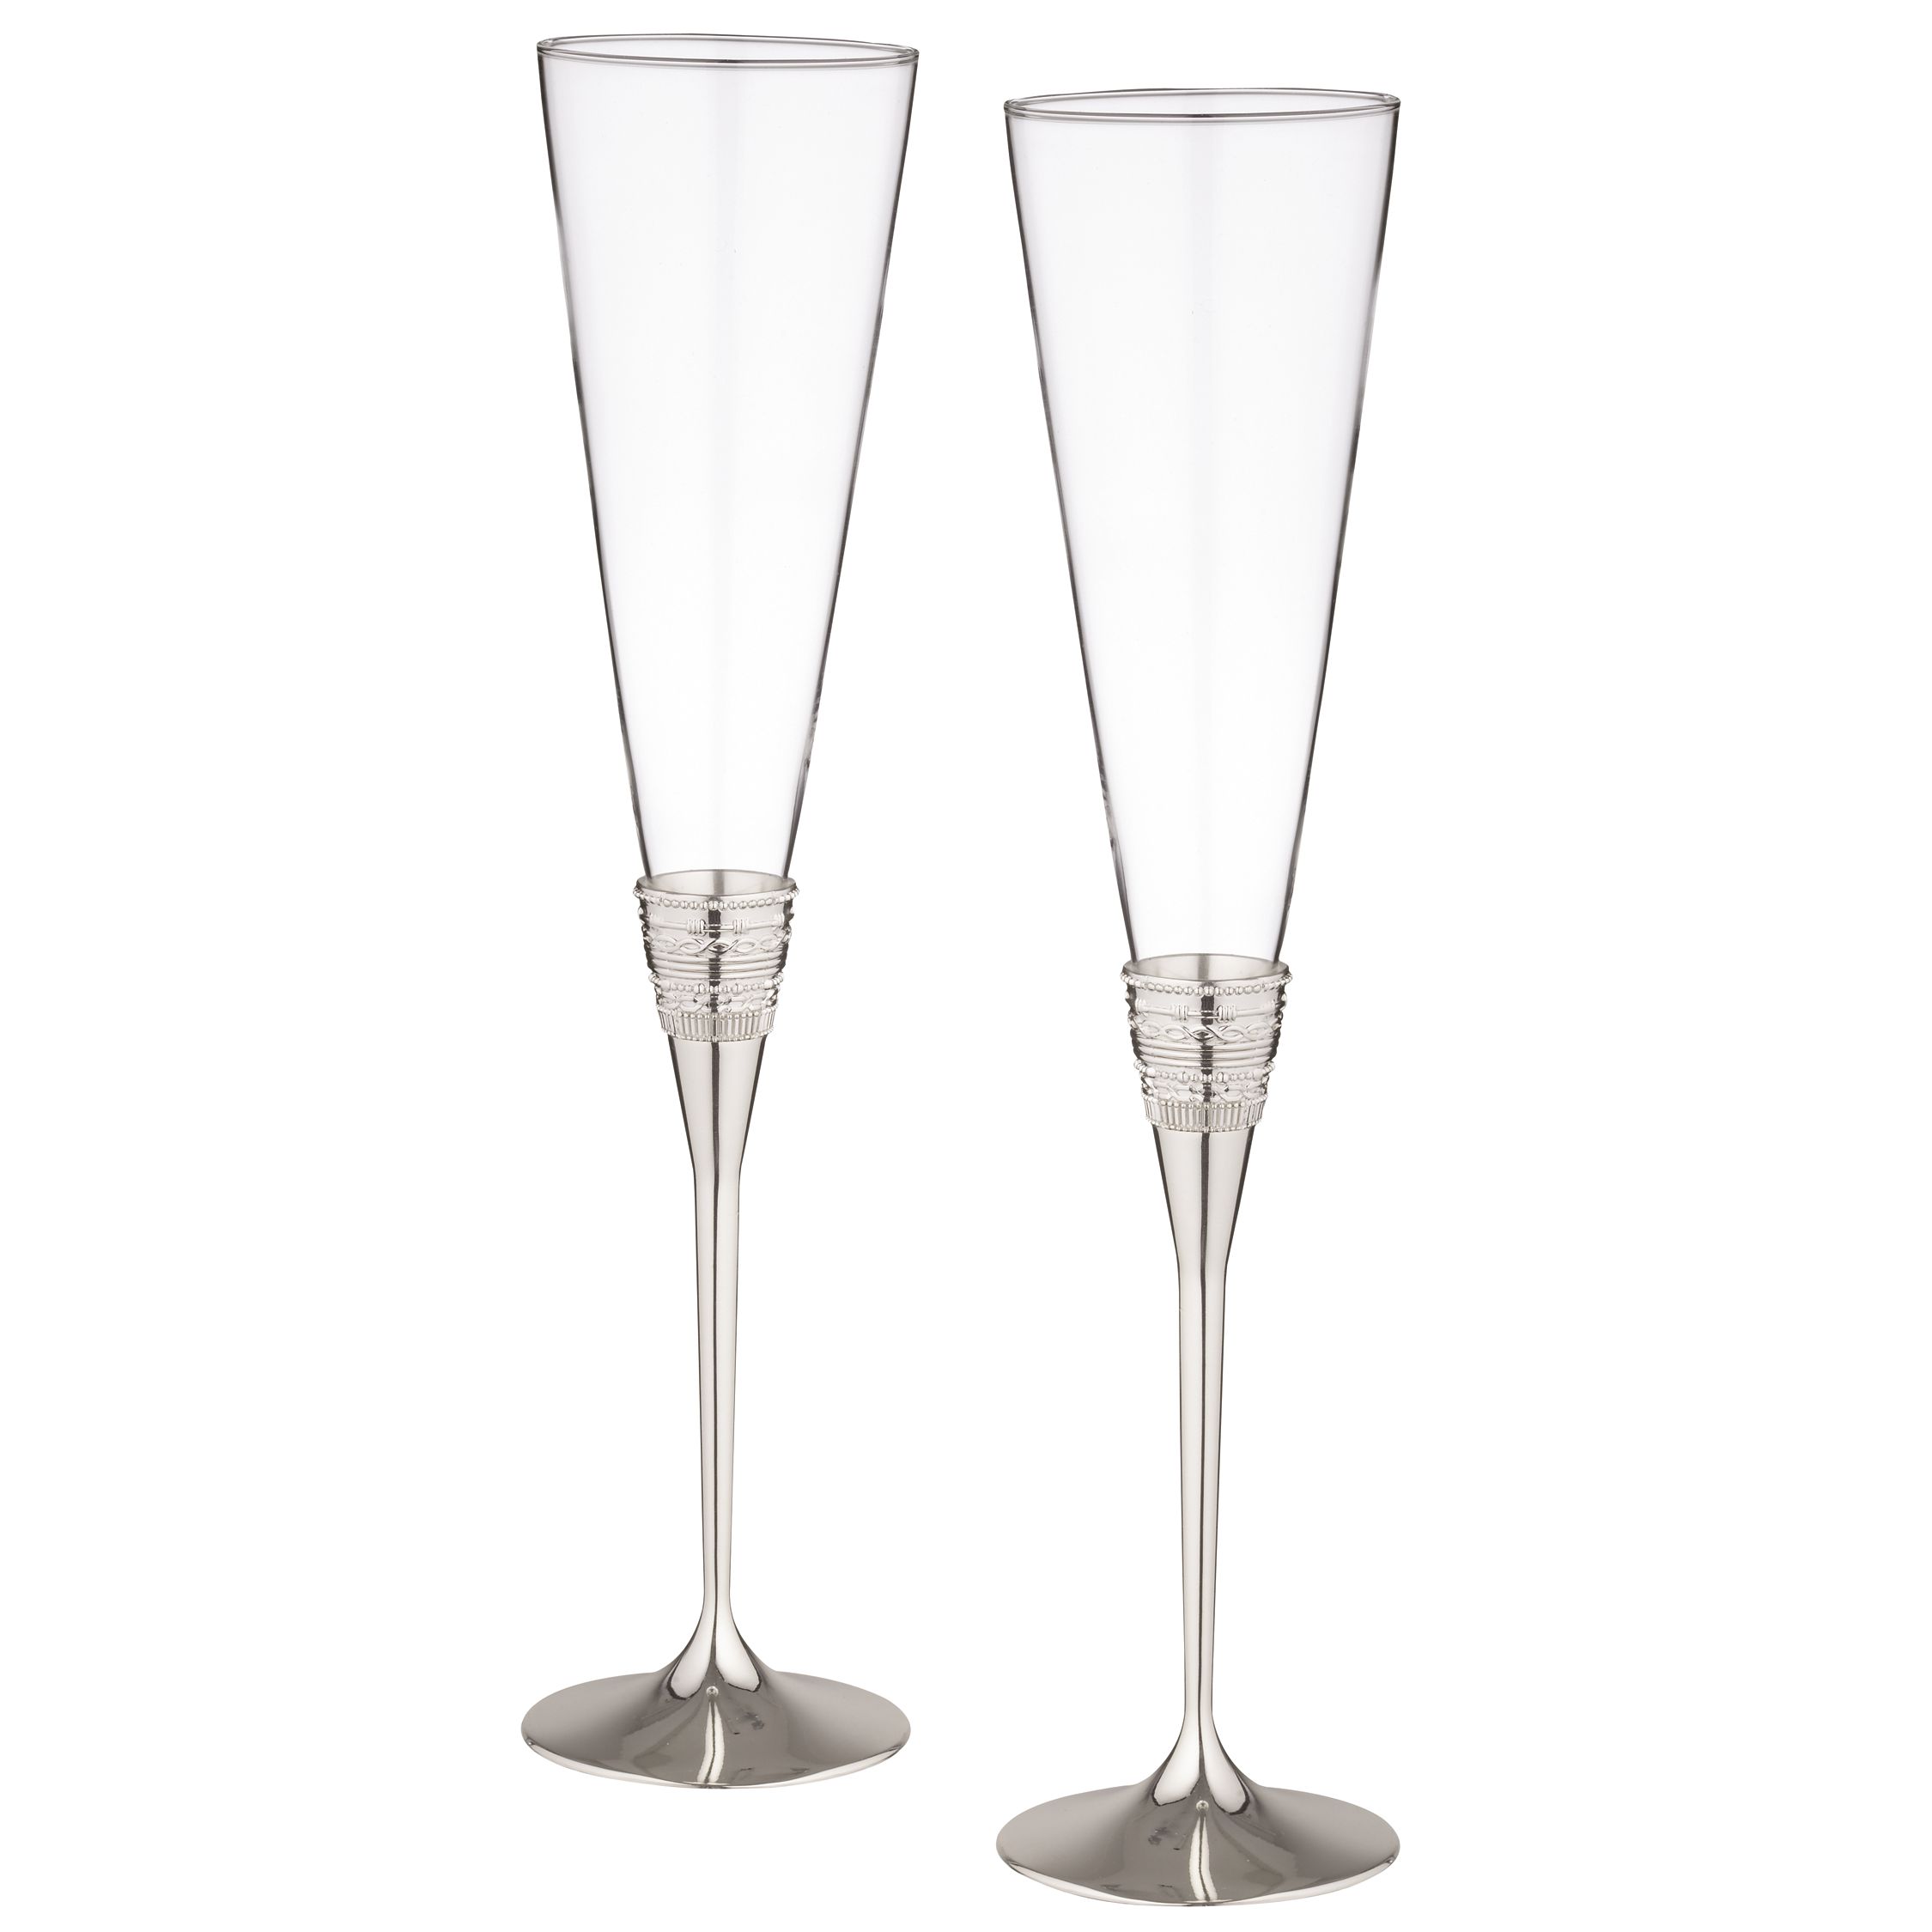 With Love Toasting Flutes, Set of 2